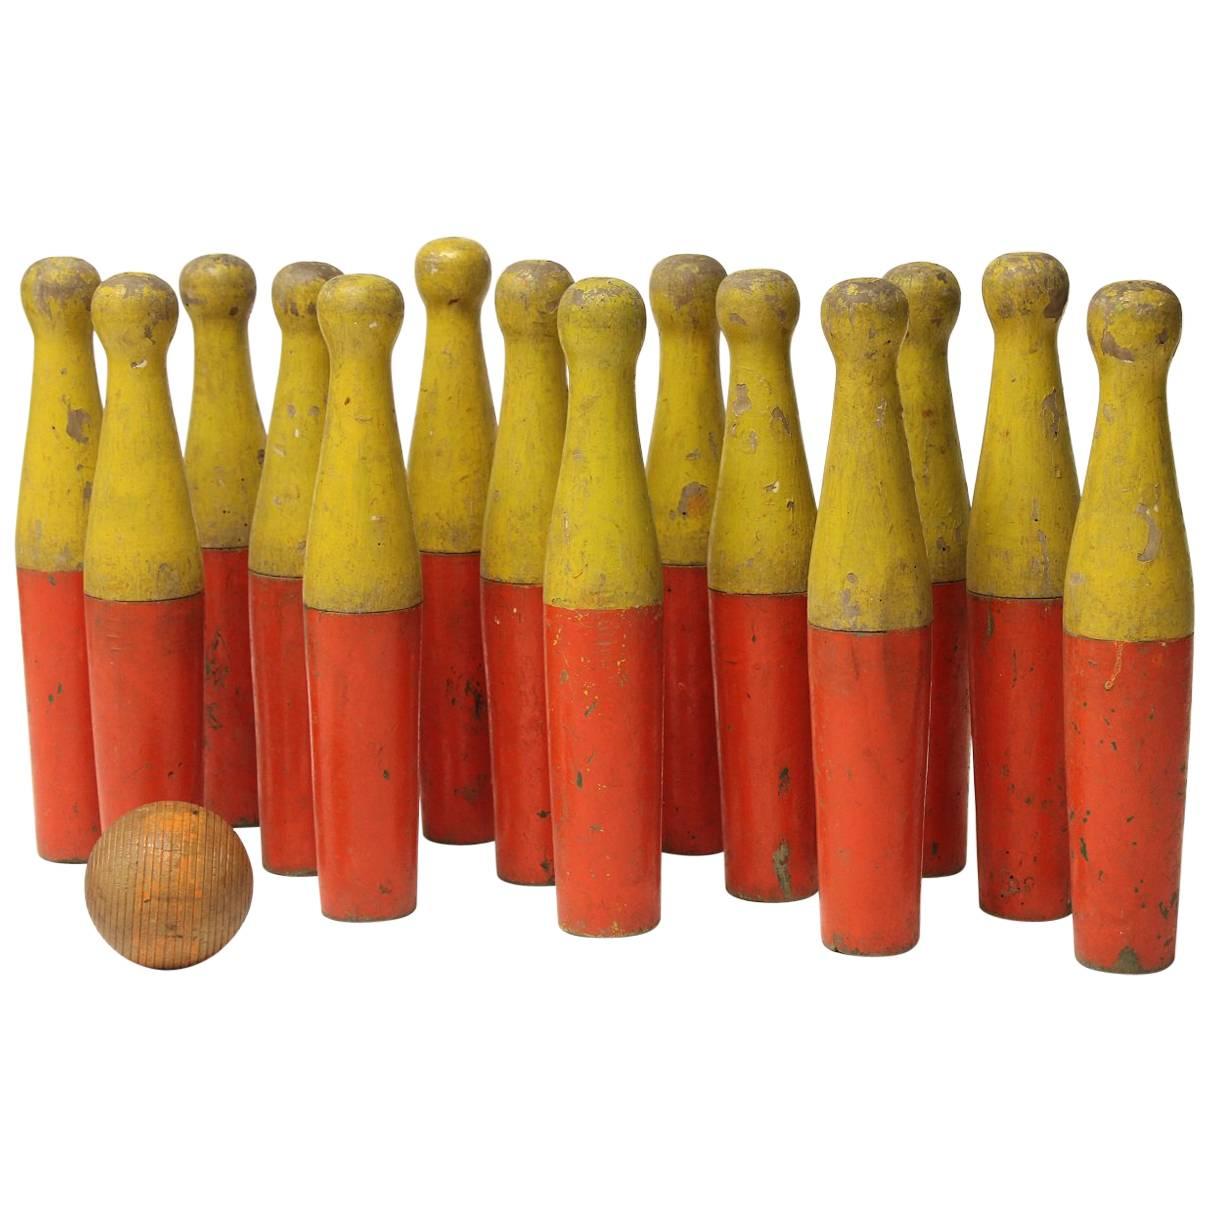 Collection of 14 Vintage Lawn Bowling Pins